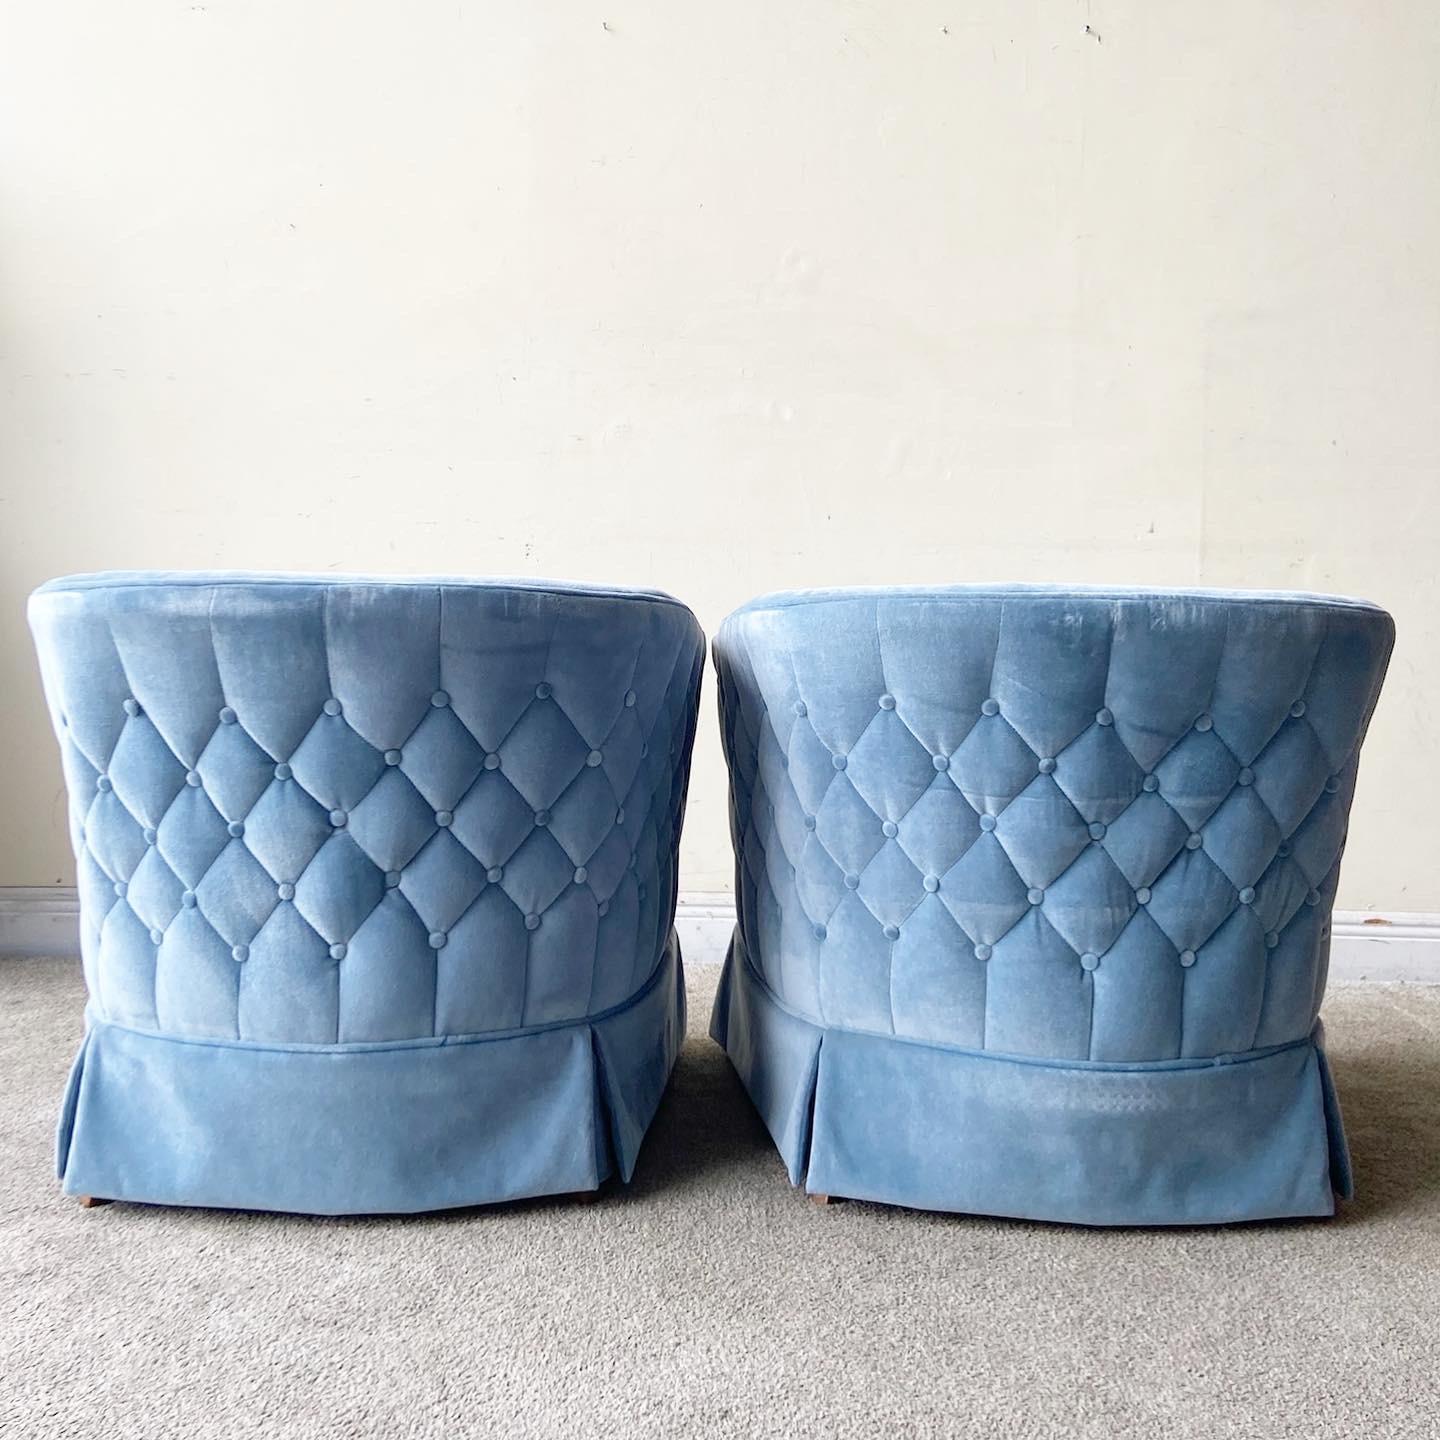 Late 20th Century Postmodern Blue Upholstered Barrel Chairs, a Pair